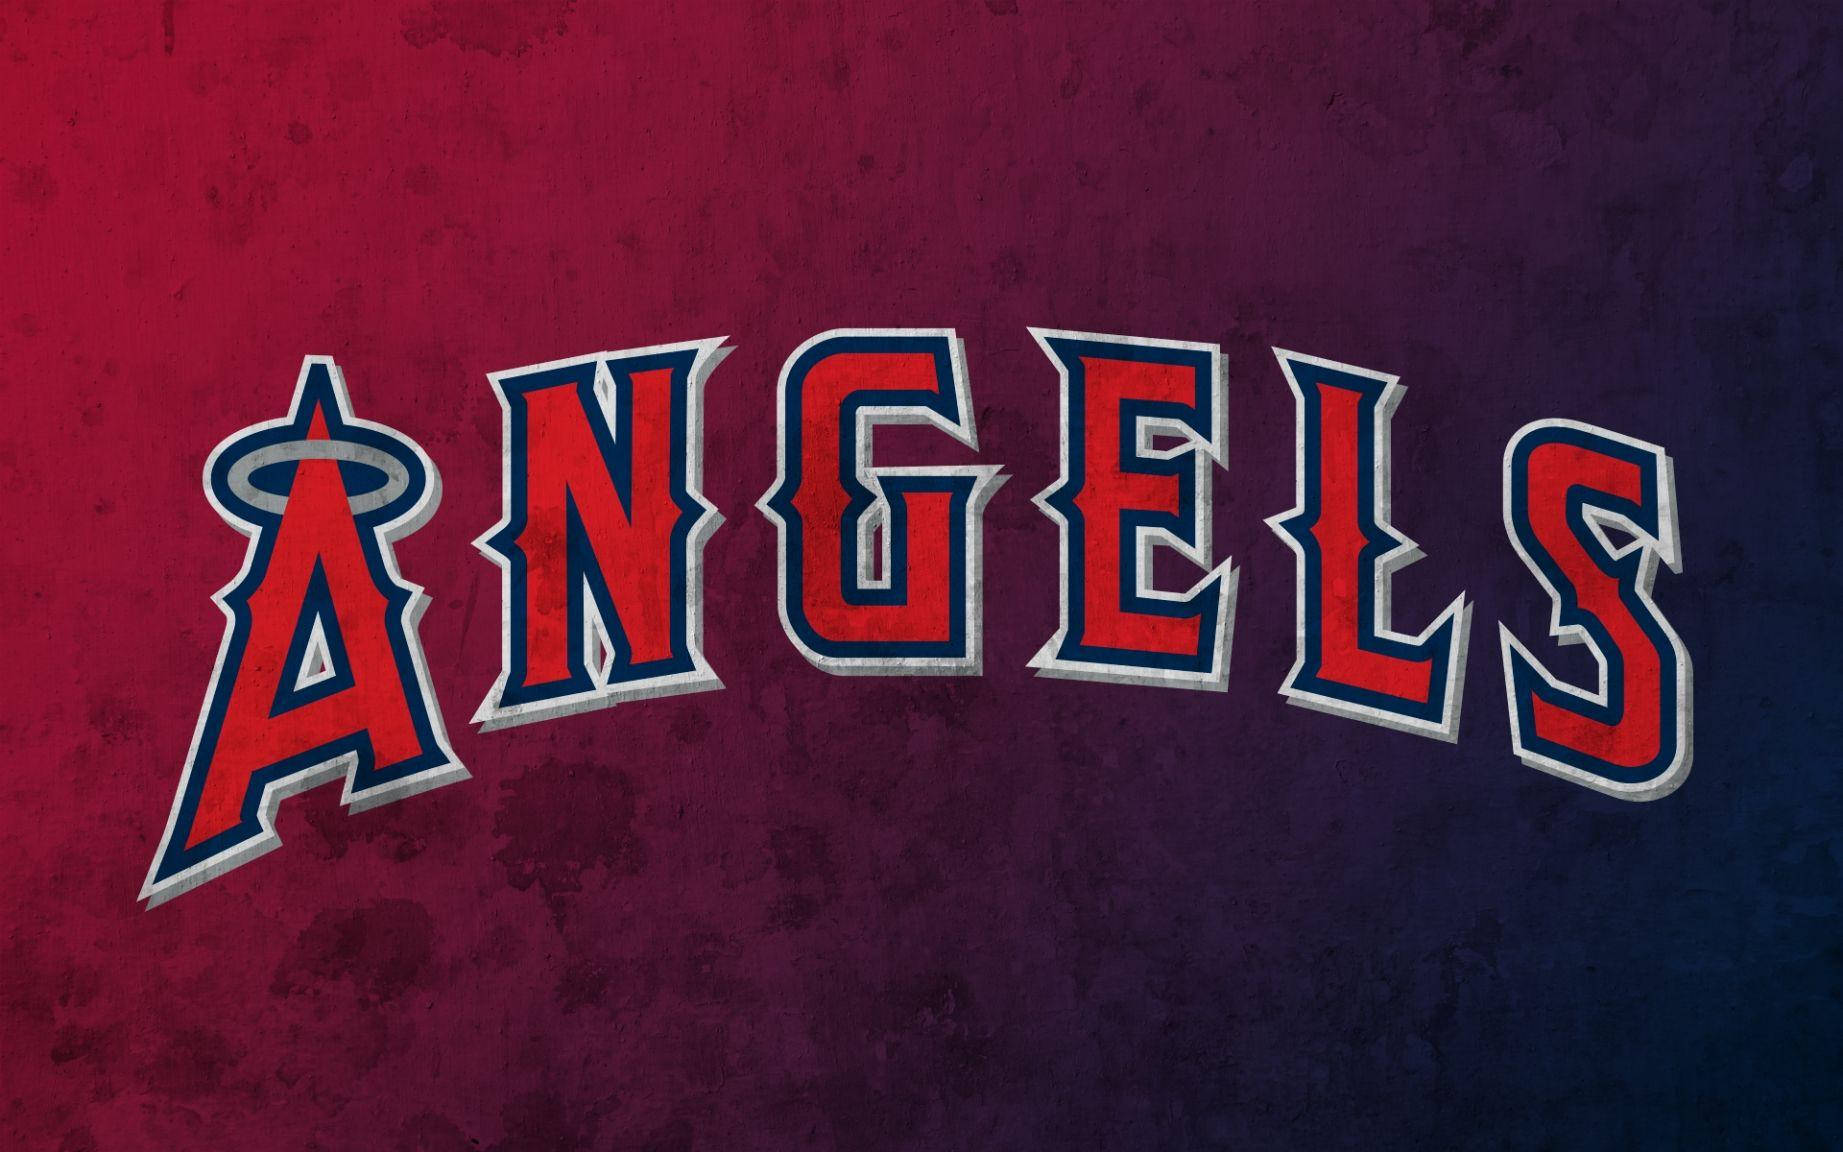 Los Angeles Angels Logo On Red And Blue